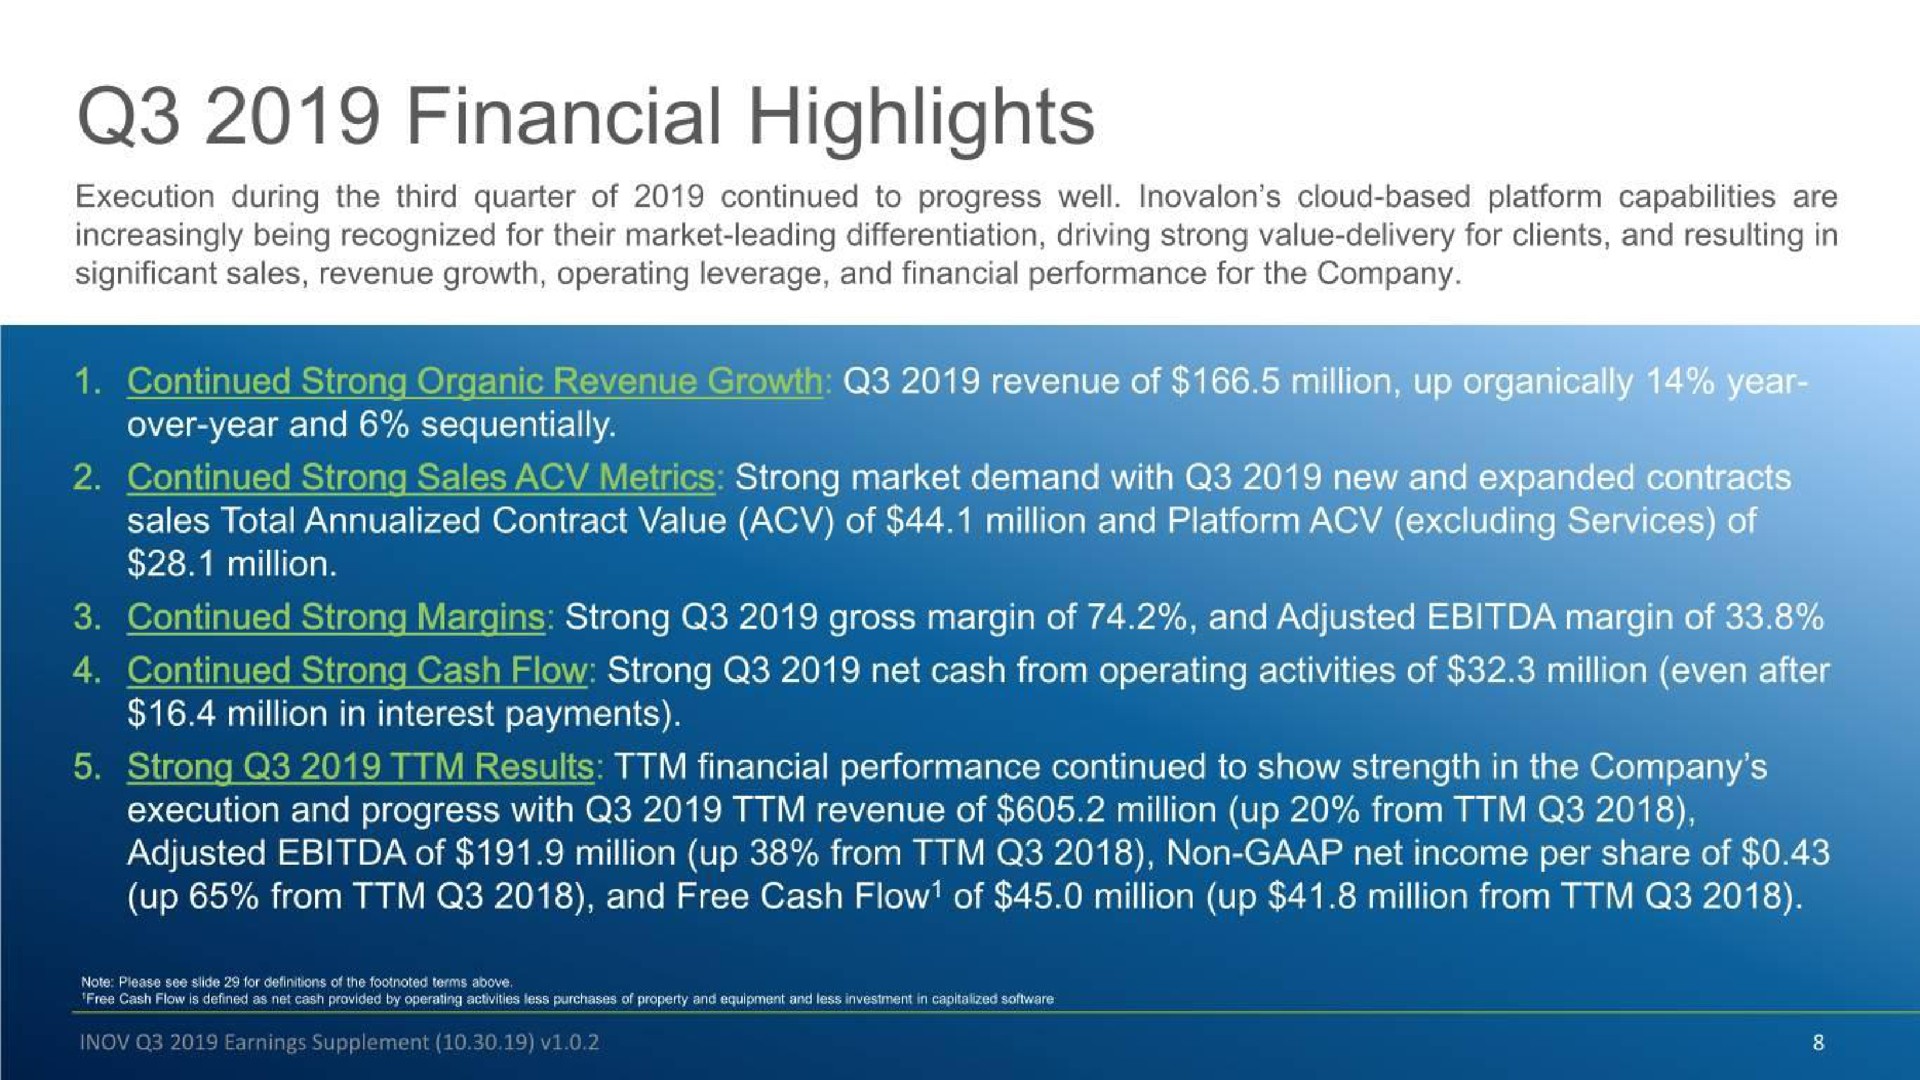 financial highlights continued strong organic revenue growth revenue of over year and sequentially continued strong margins strong gross margin of and adjusted margin of continued strong cash flow strong net cash from operating activities of million even after up from and free cash flow of million up million from | Inovalon